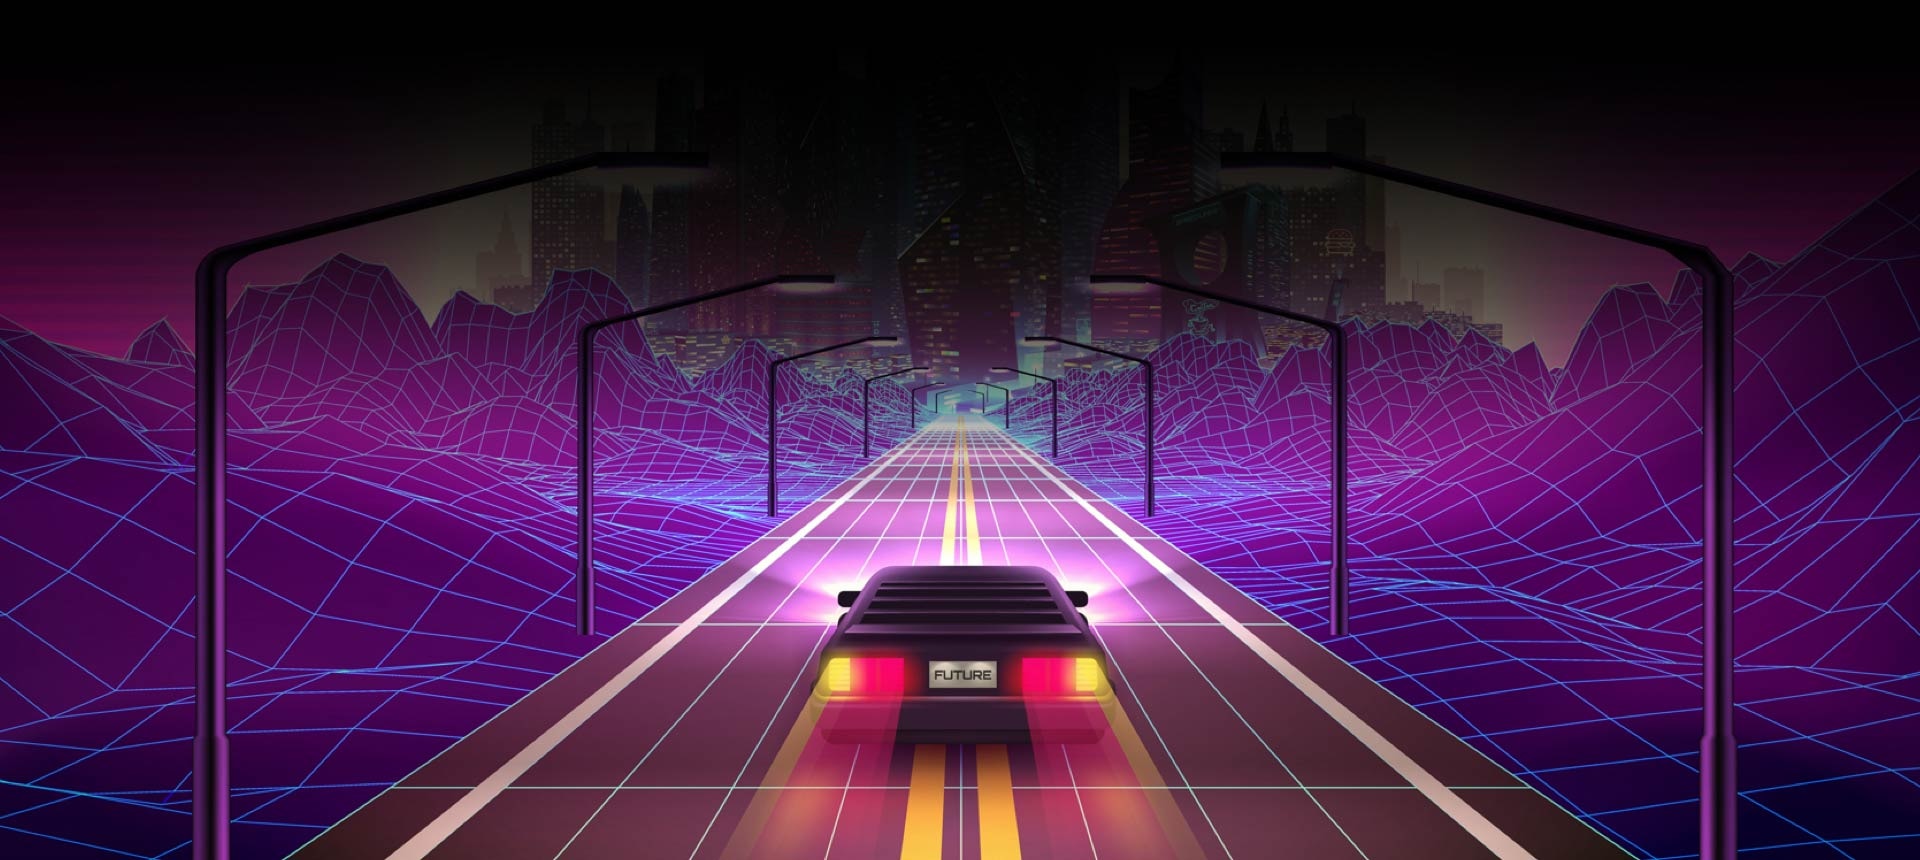 An illustration of a car racing game. "FUTURE" is written on the car plate.